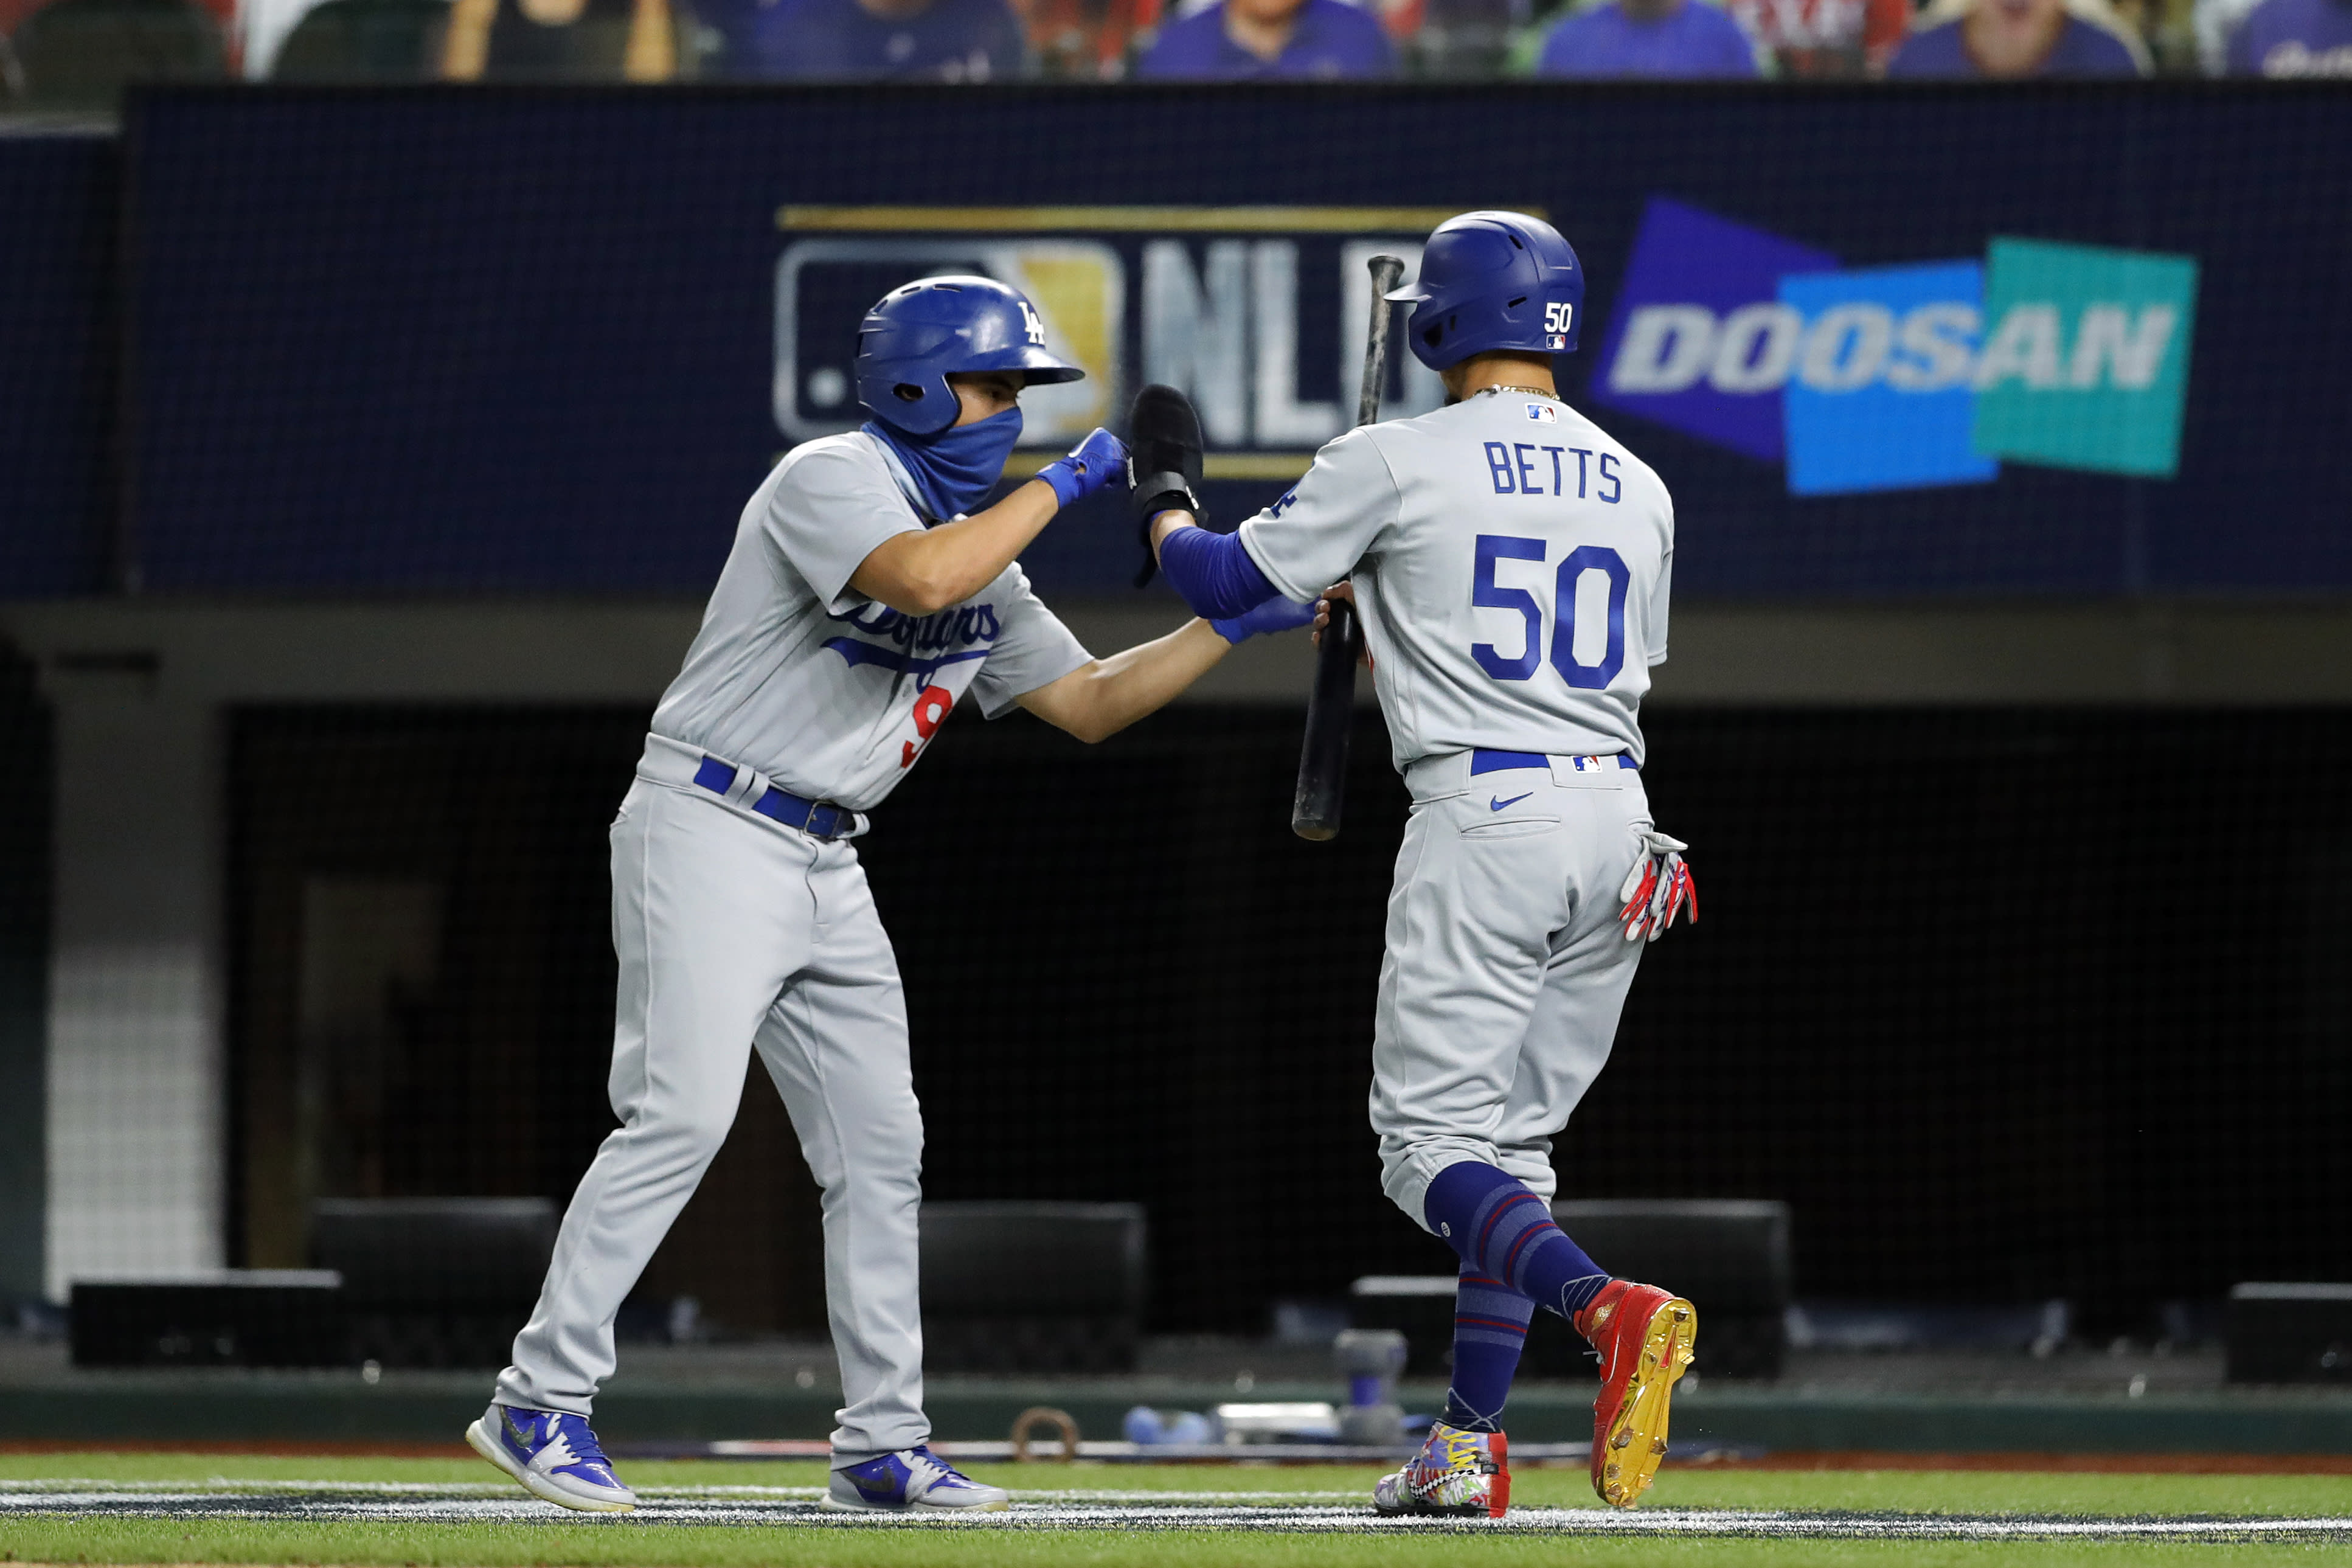 MLB postseason Scores, highlights results and schedules